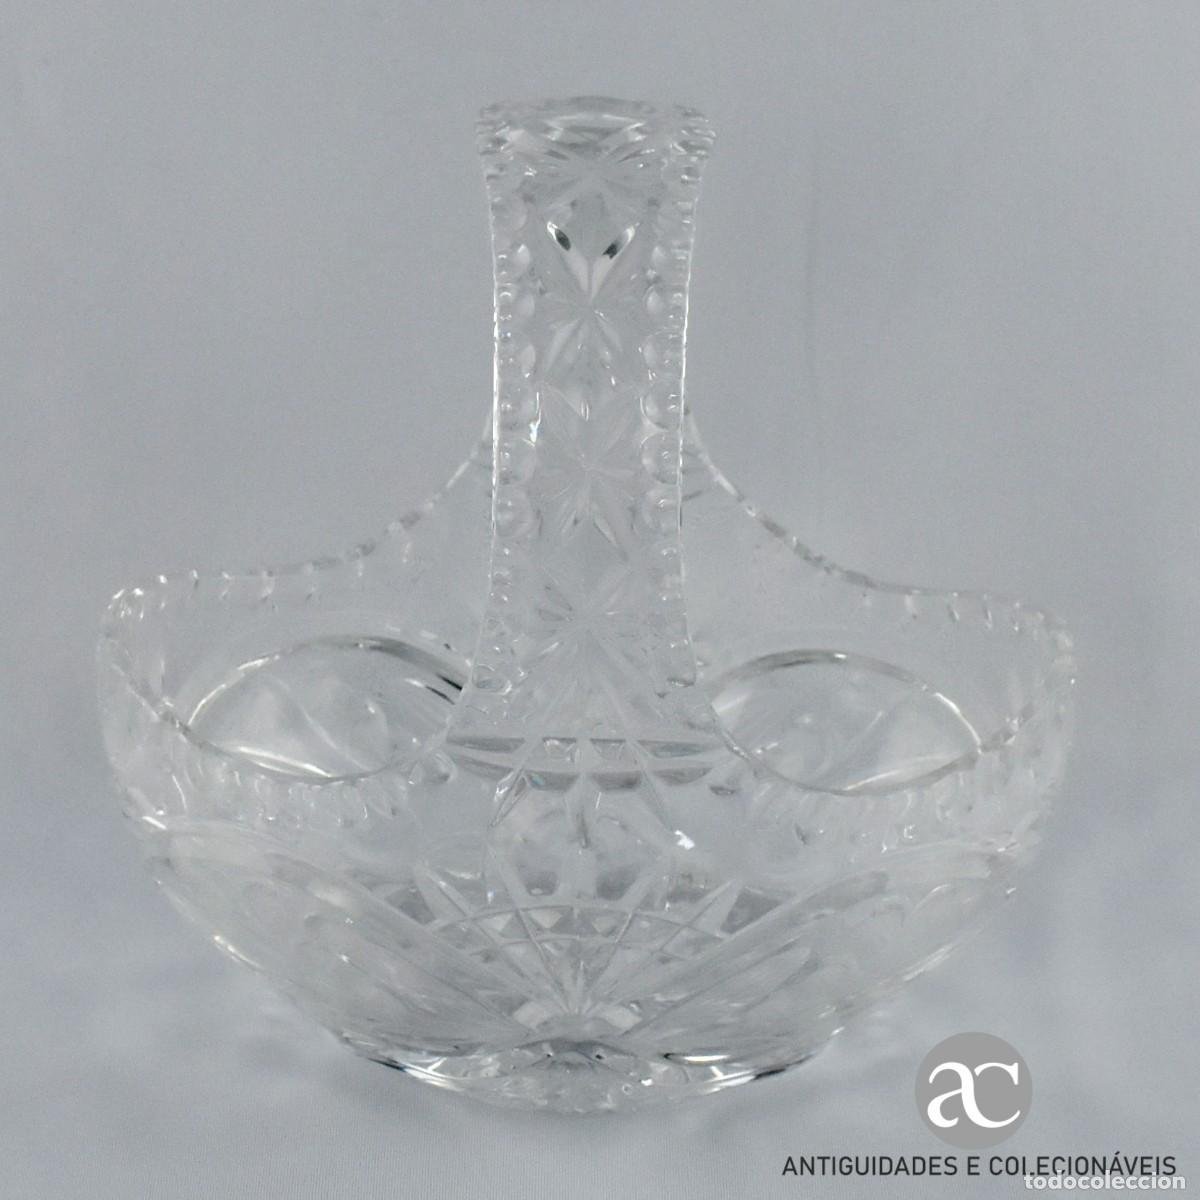 Vintage glass and crystal objects, page 115